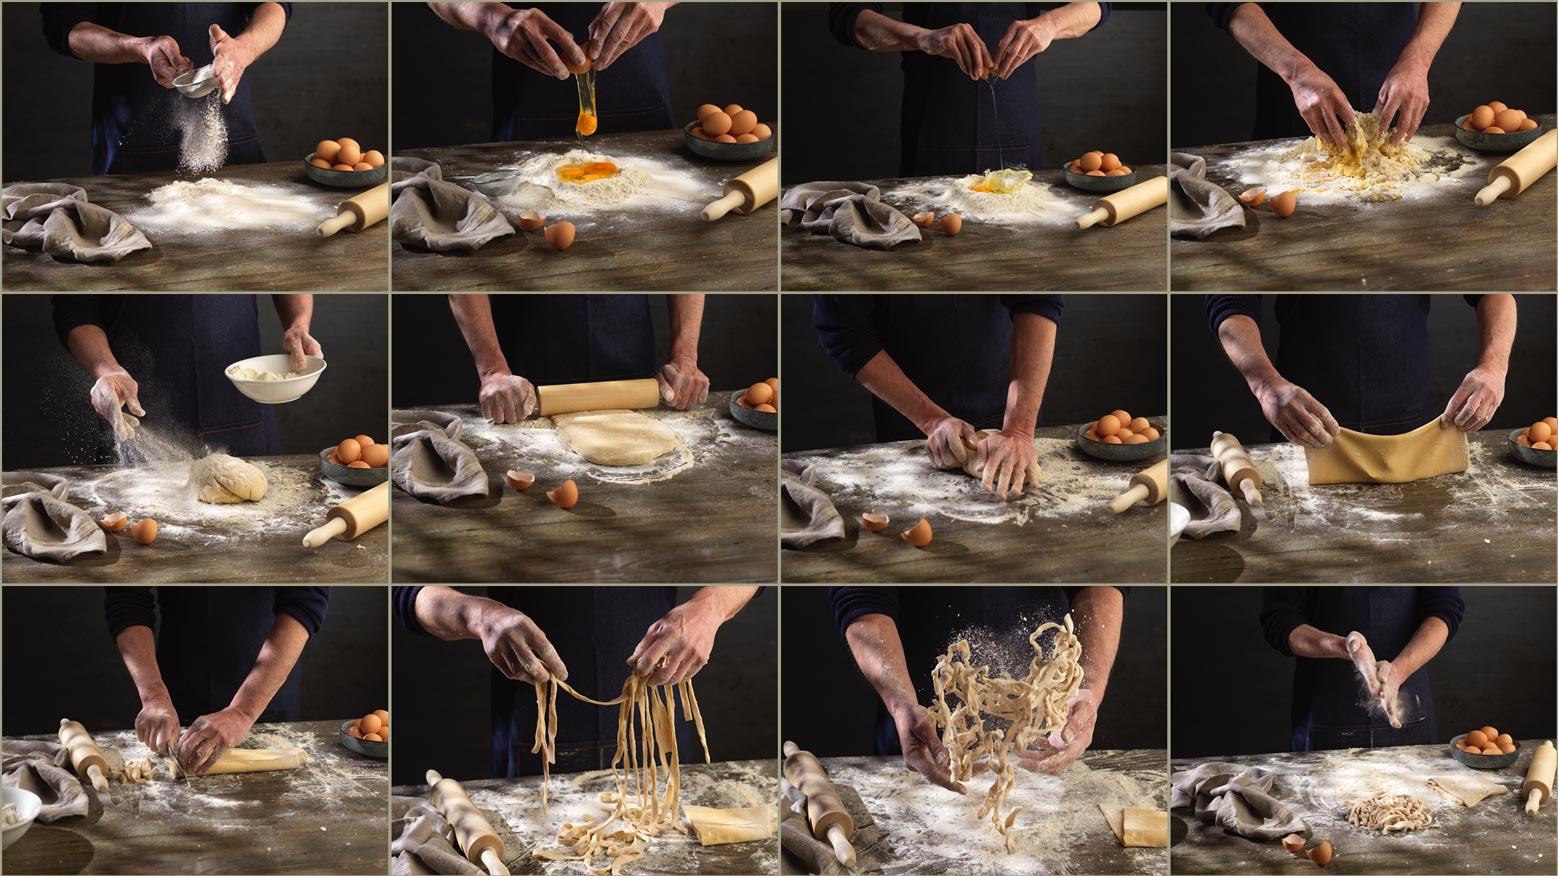 Editorial food photography